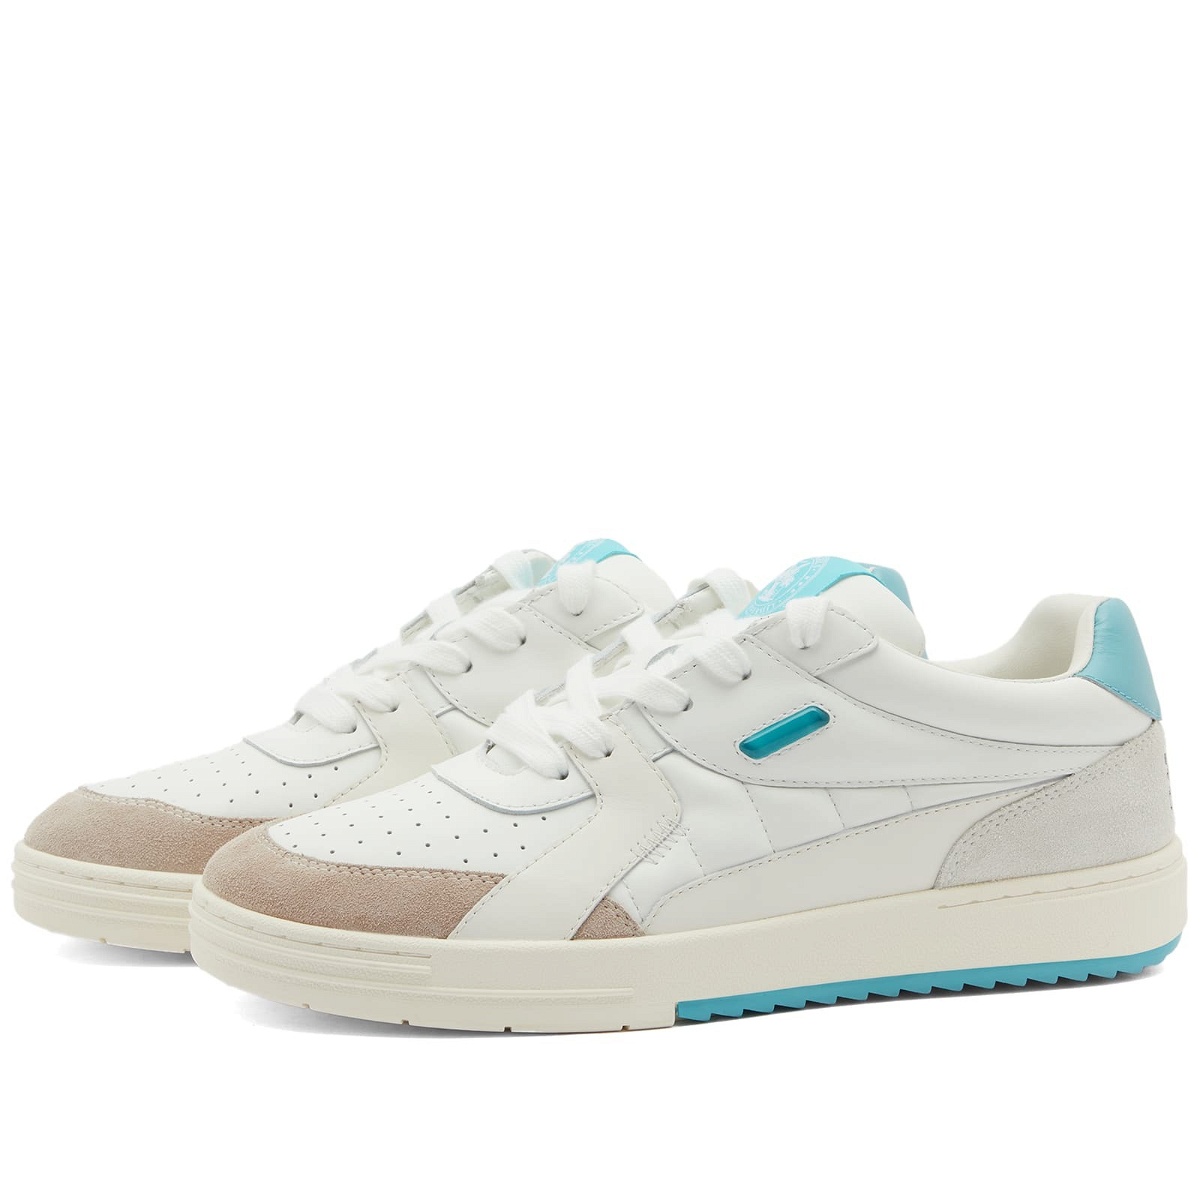 Palm Angels Men's University Vintage Sneakers in White Palm Angels